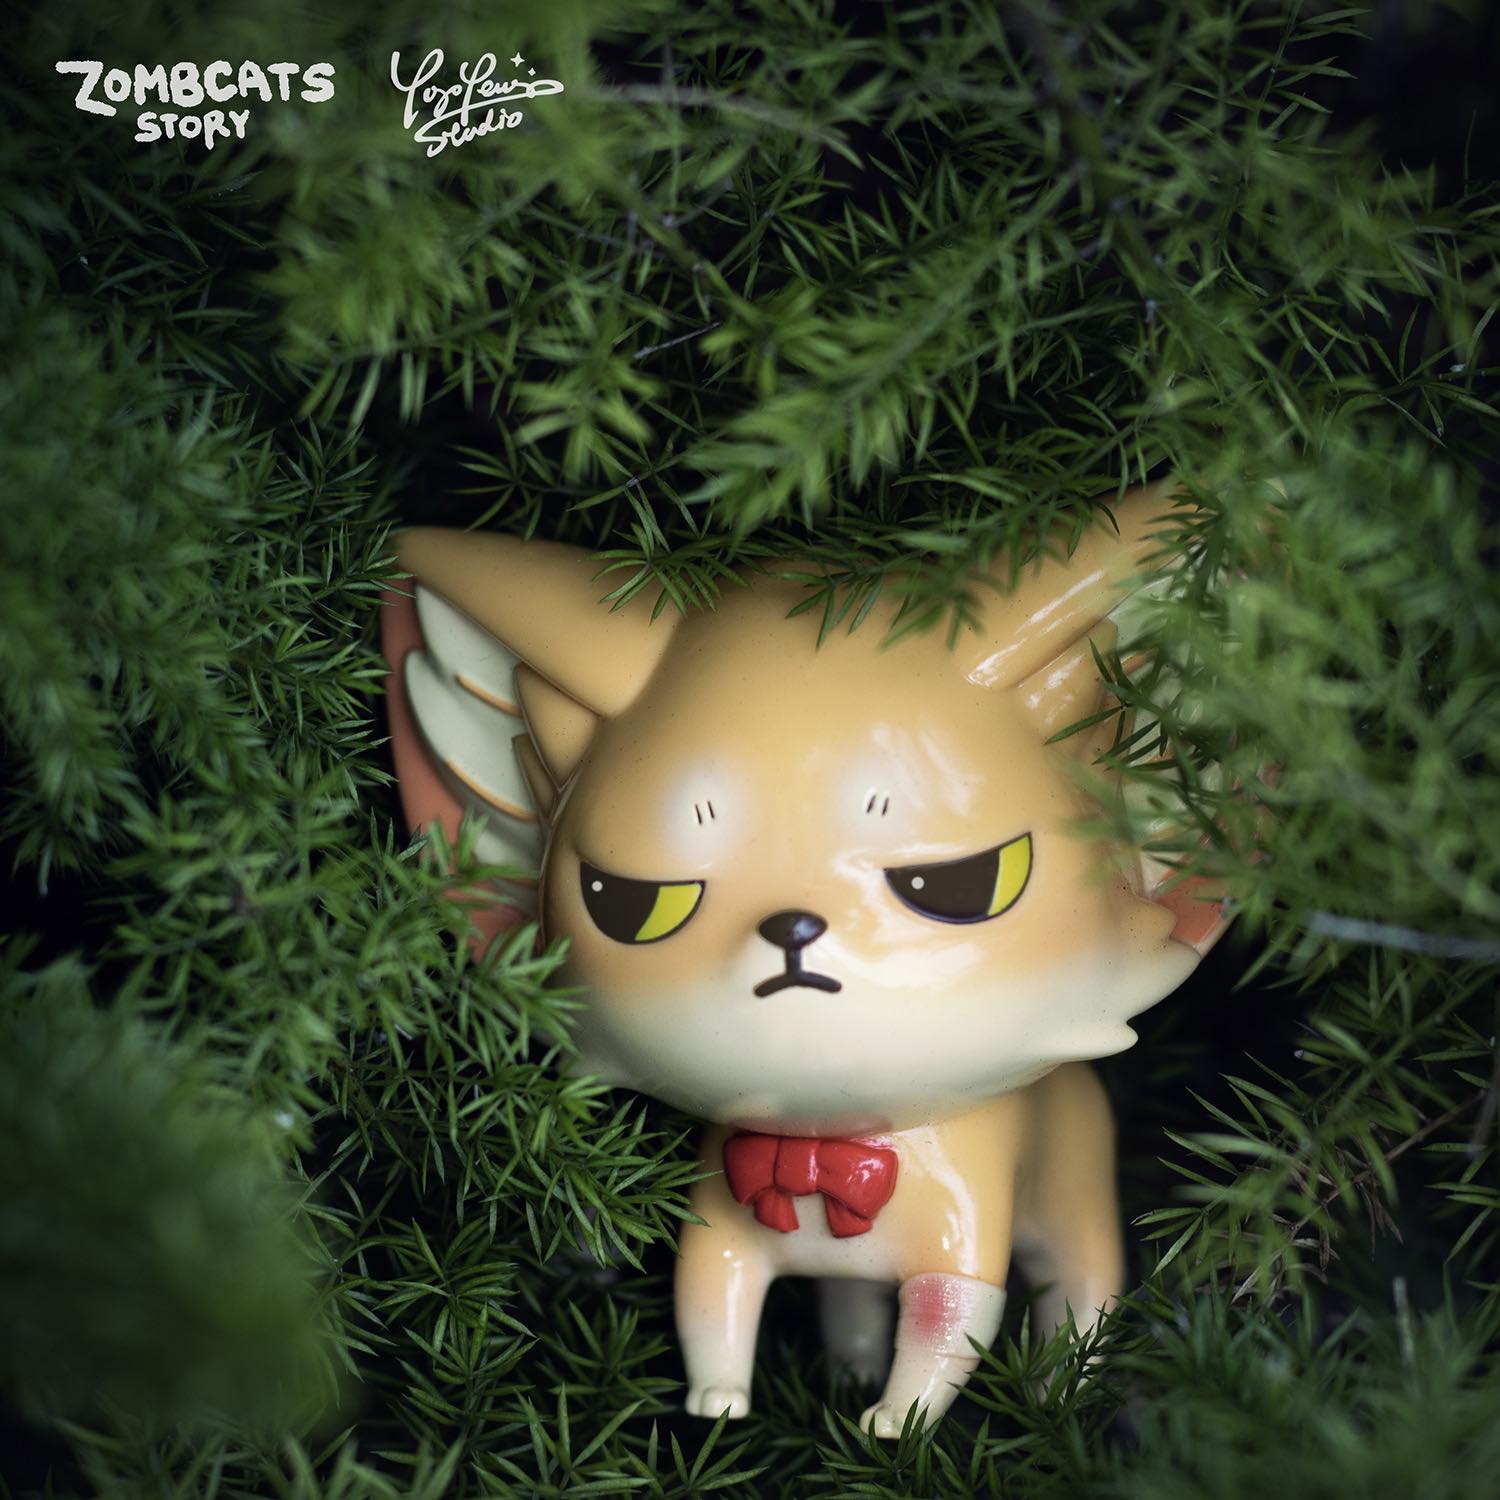 A limited edition Zombcat toy, Doomsday Biology Atlas - Doomsday Fox Kenneth by Morimei X Yoyo Yeung Studio, perched in a tree. Soft vinyl, 7cm, exclusive to North America.